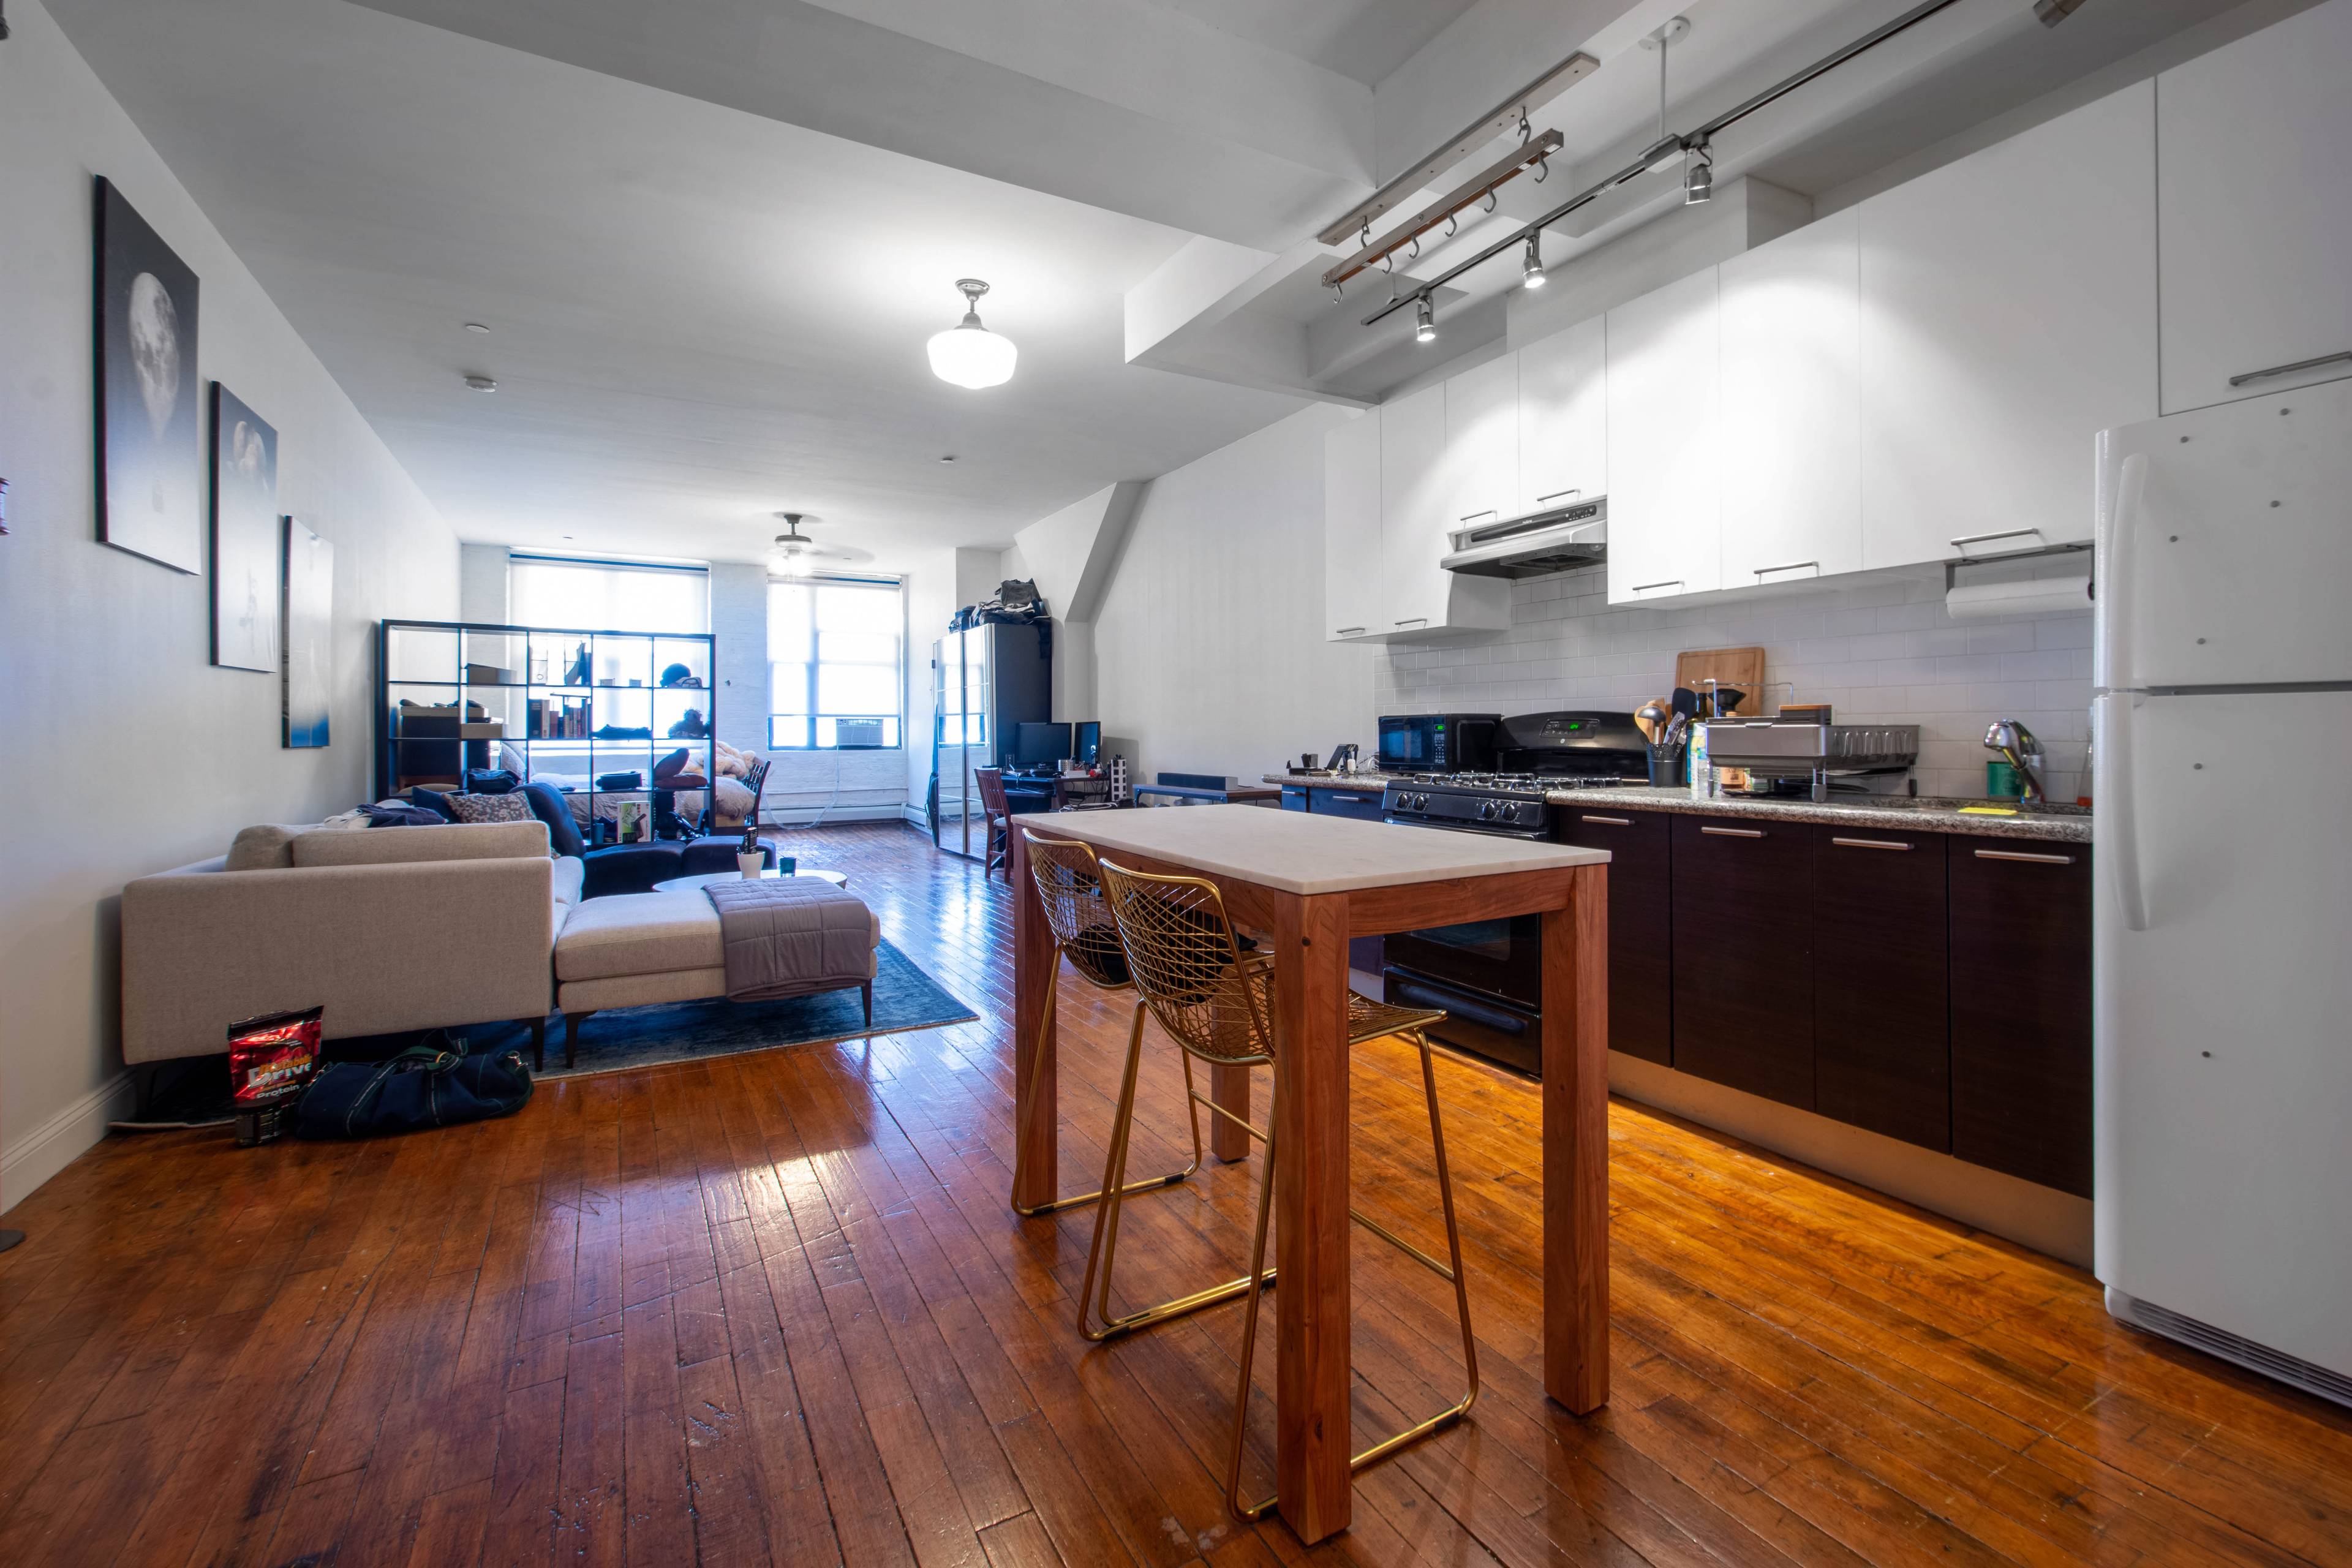 THE LOFT This beautiful and authentic Williamsburg loft is on the Third floor of a timeless brick building near the corner of North 3rd Street and Berry Street.